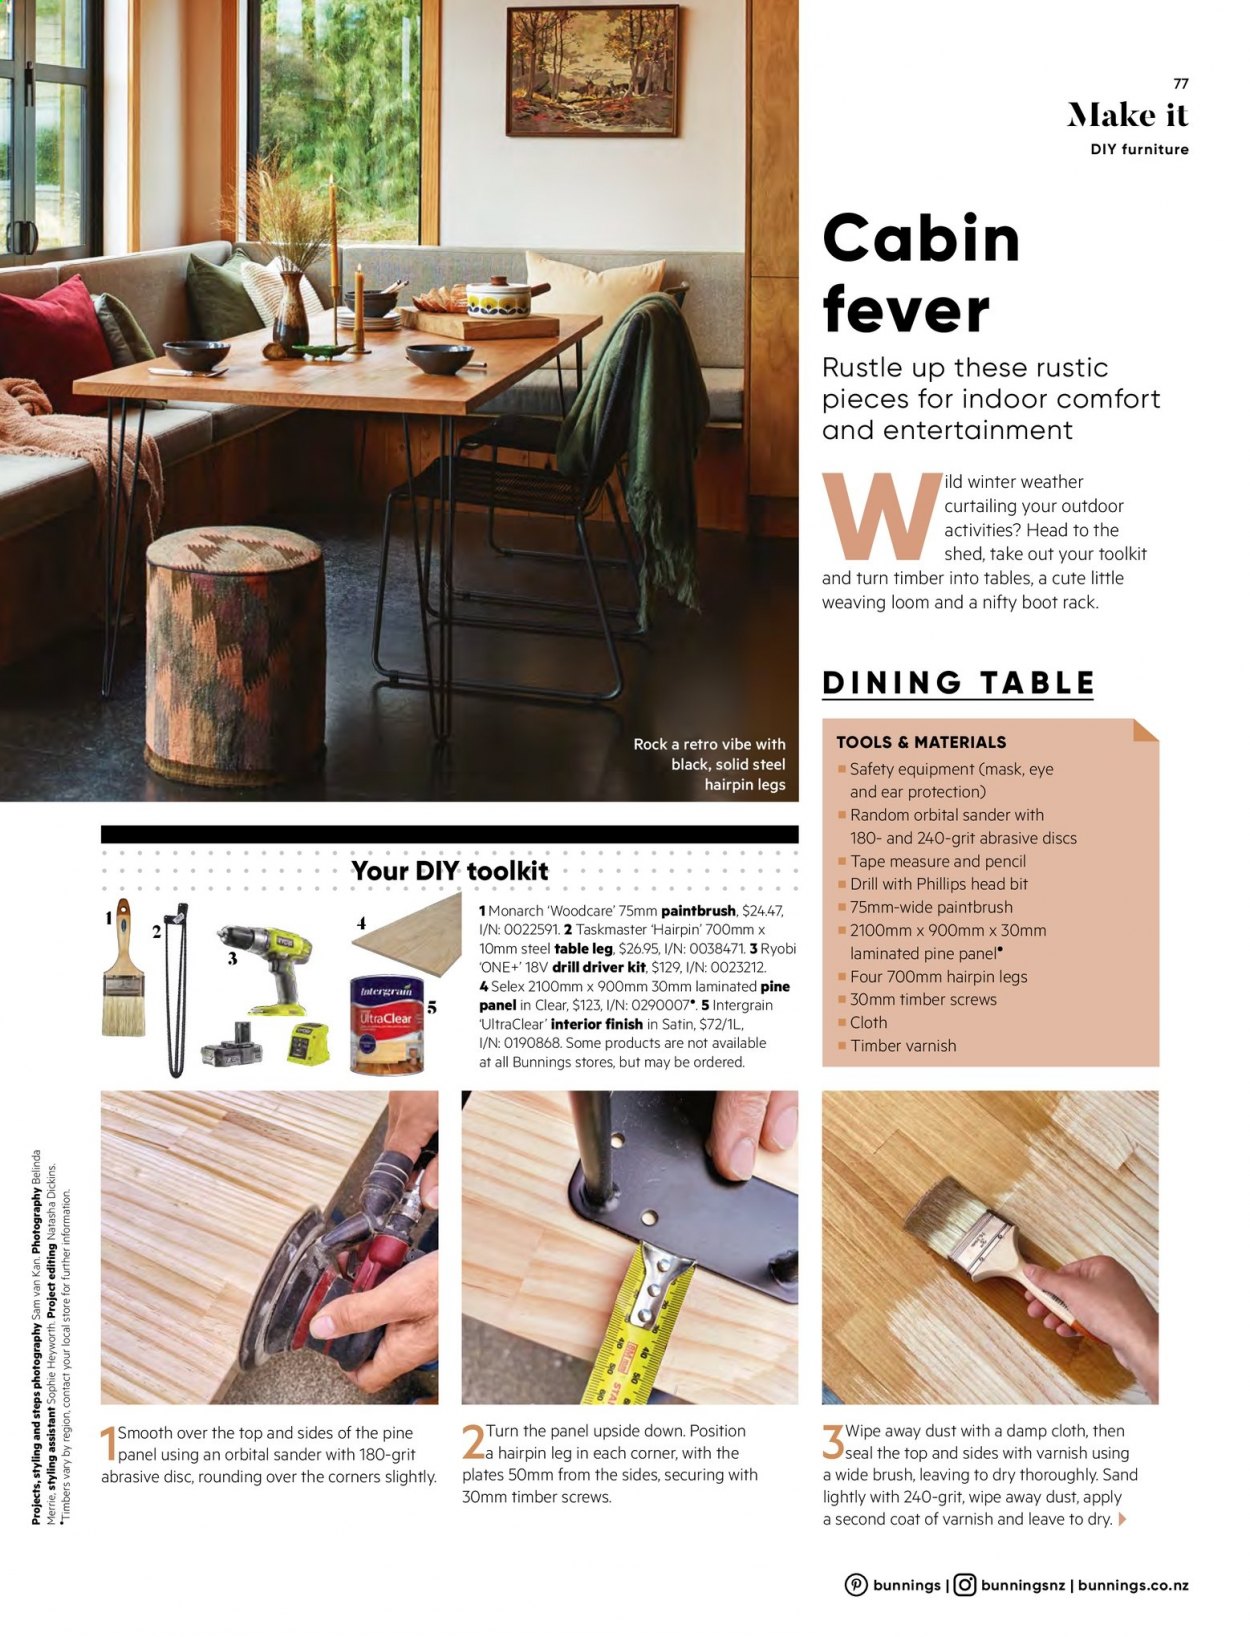 thumbnail - Bunnings Warehouse mailer - Sales products - dining table, table leg, brush, drill, drill driver kit, Ryobi, measuring tape, shed. Page 77.